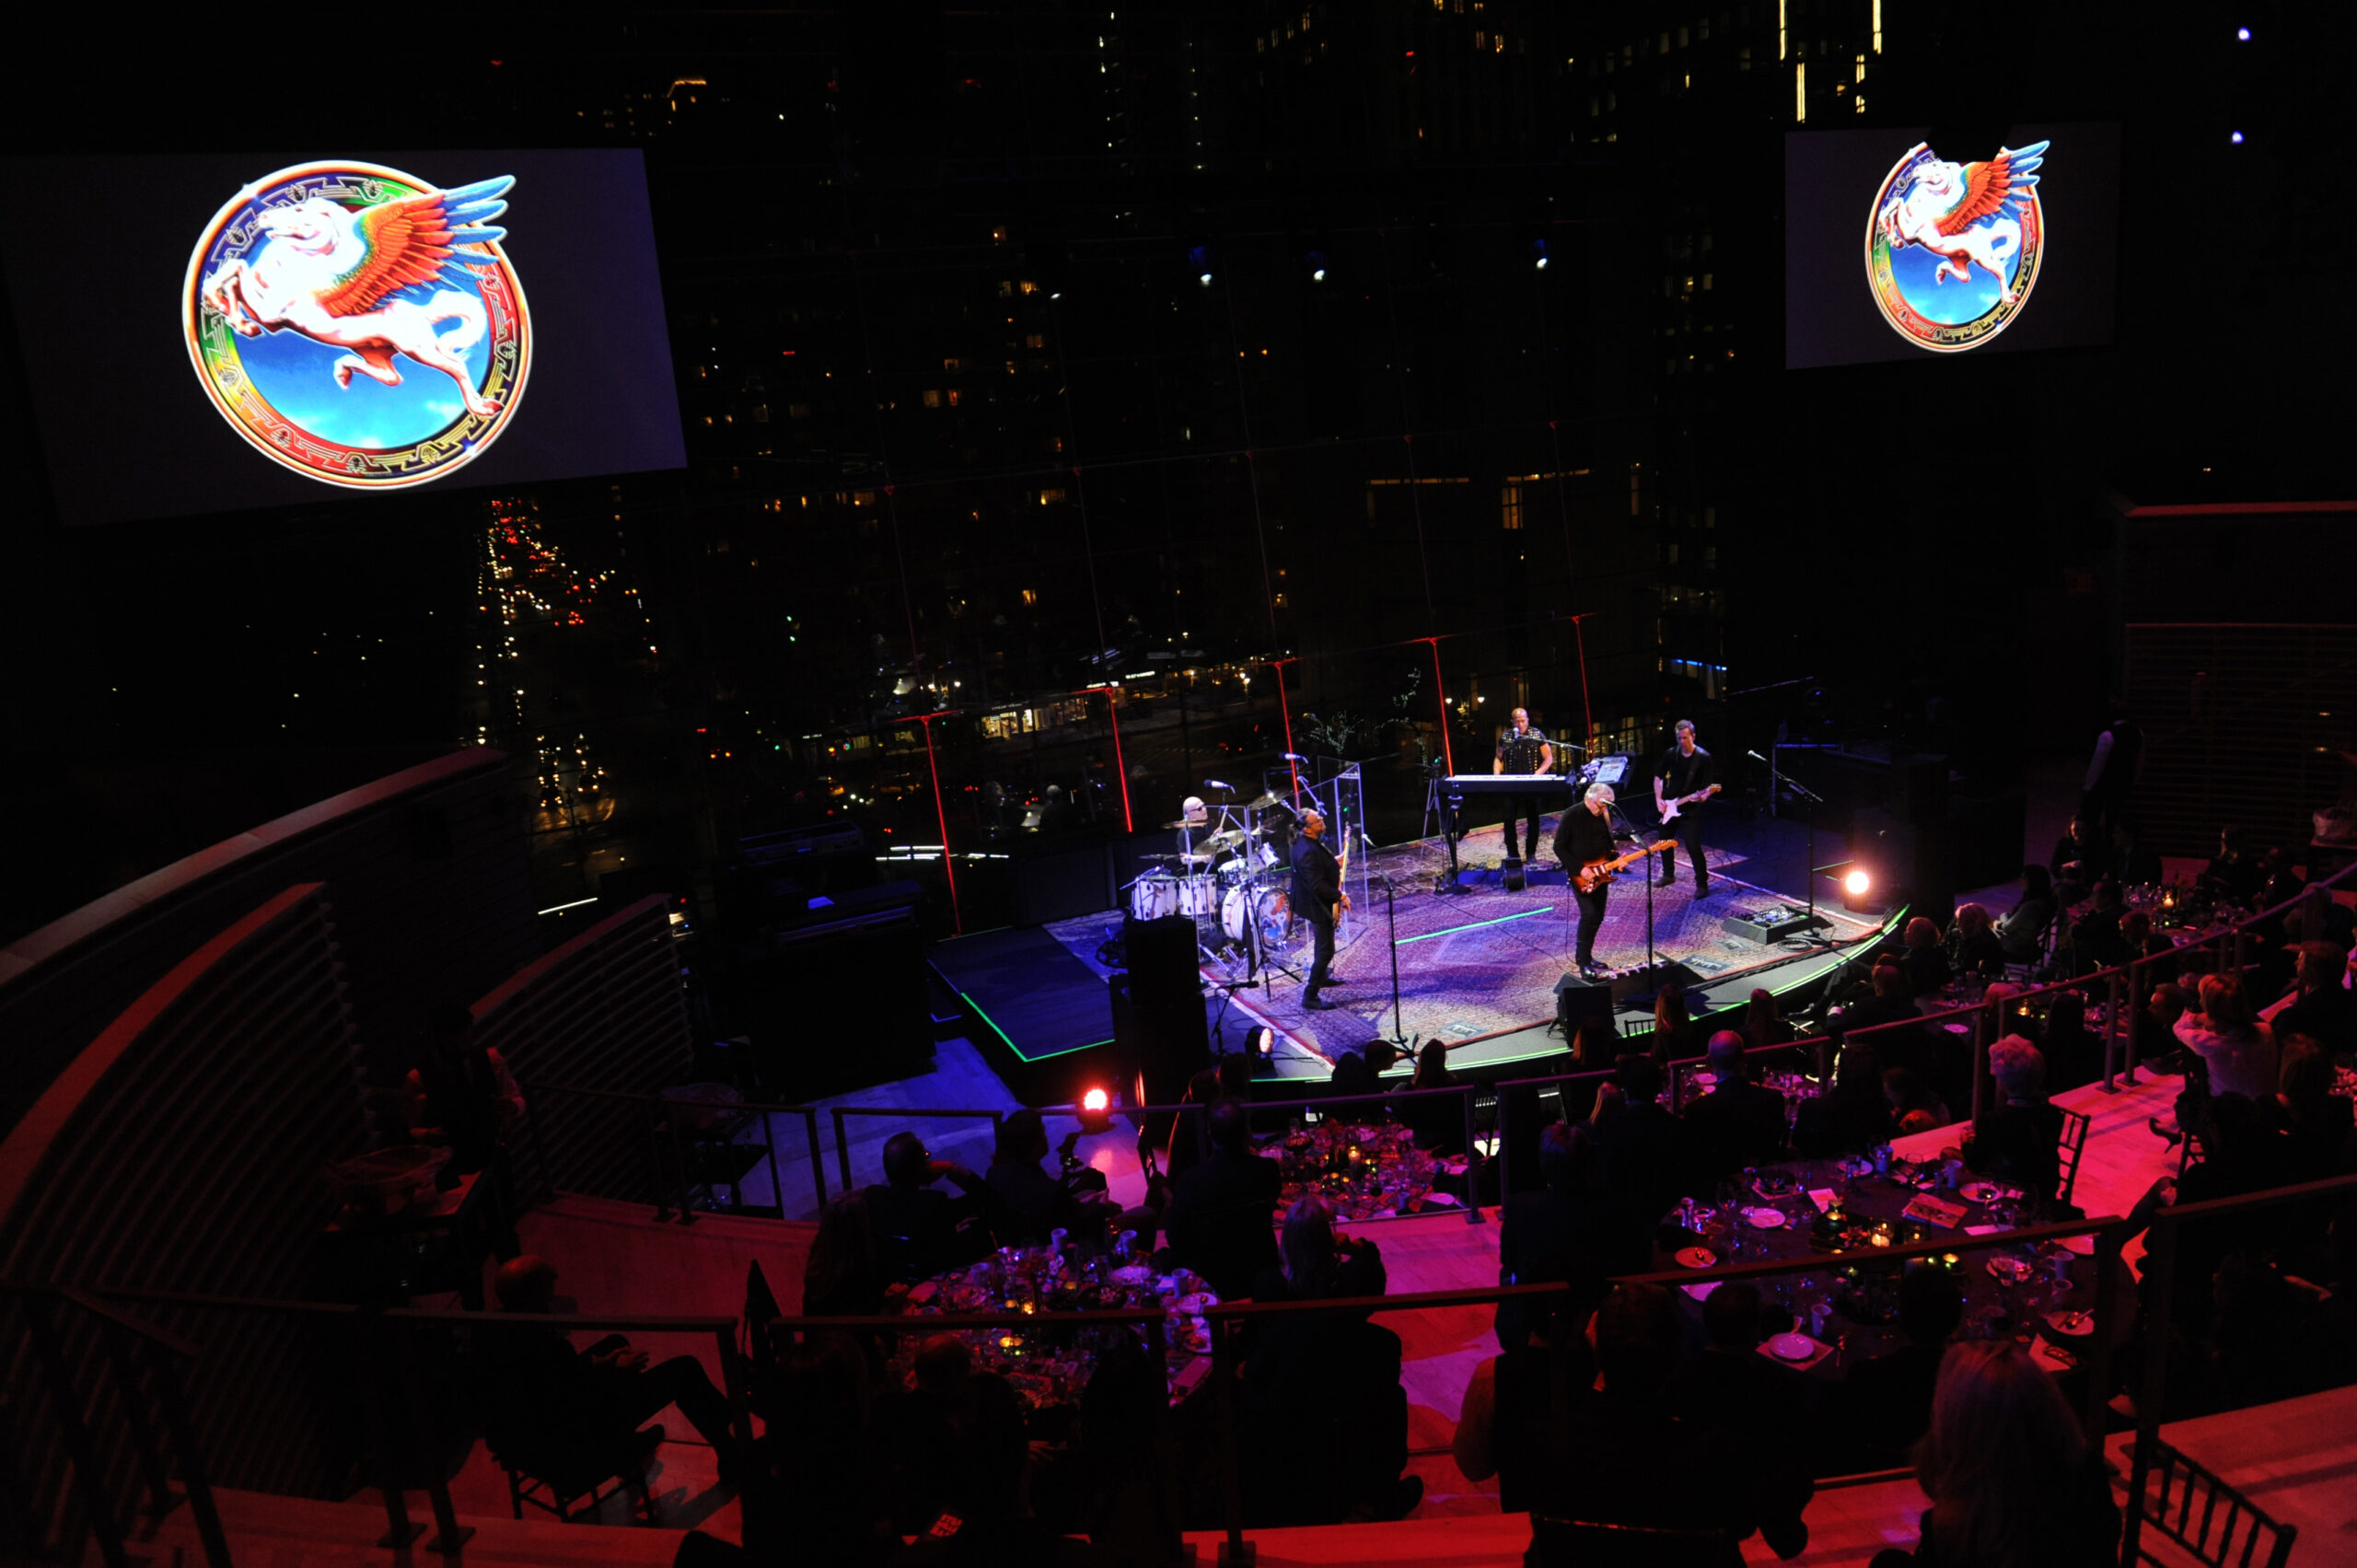 far out view of steve miller band performing with their logos of the flying eagle